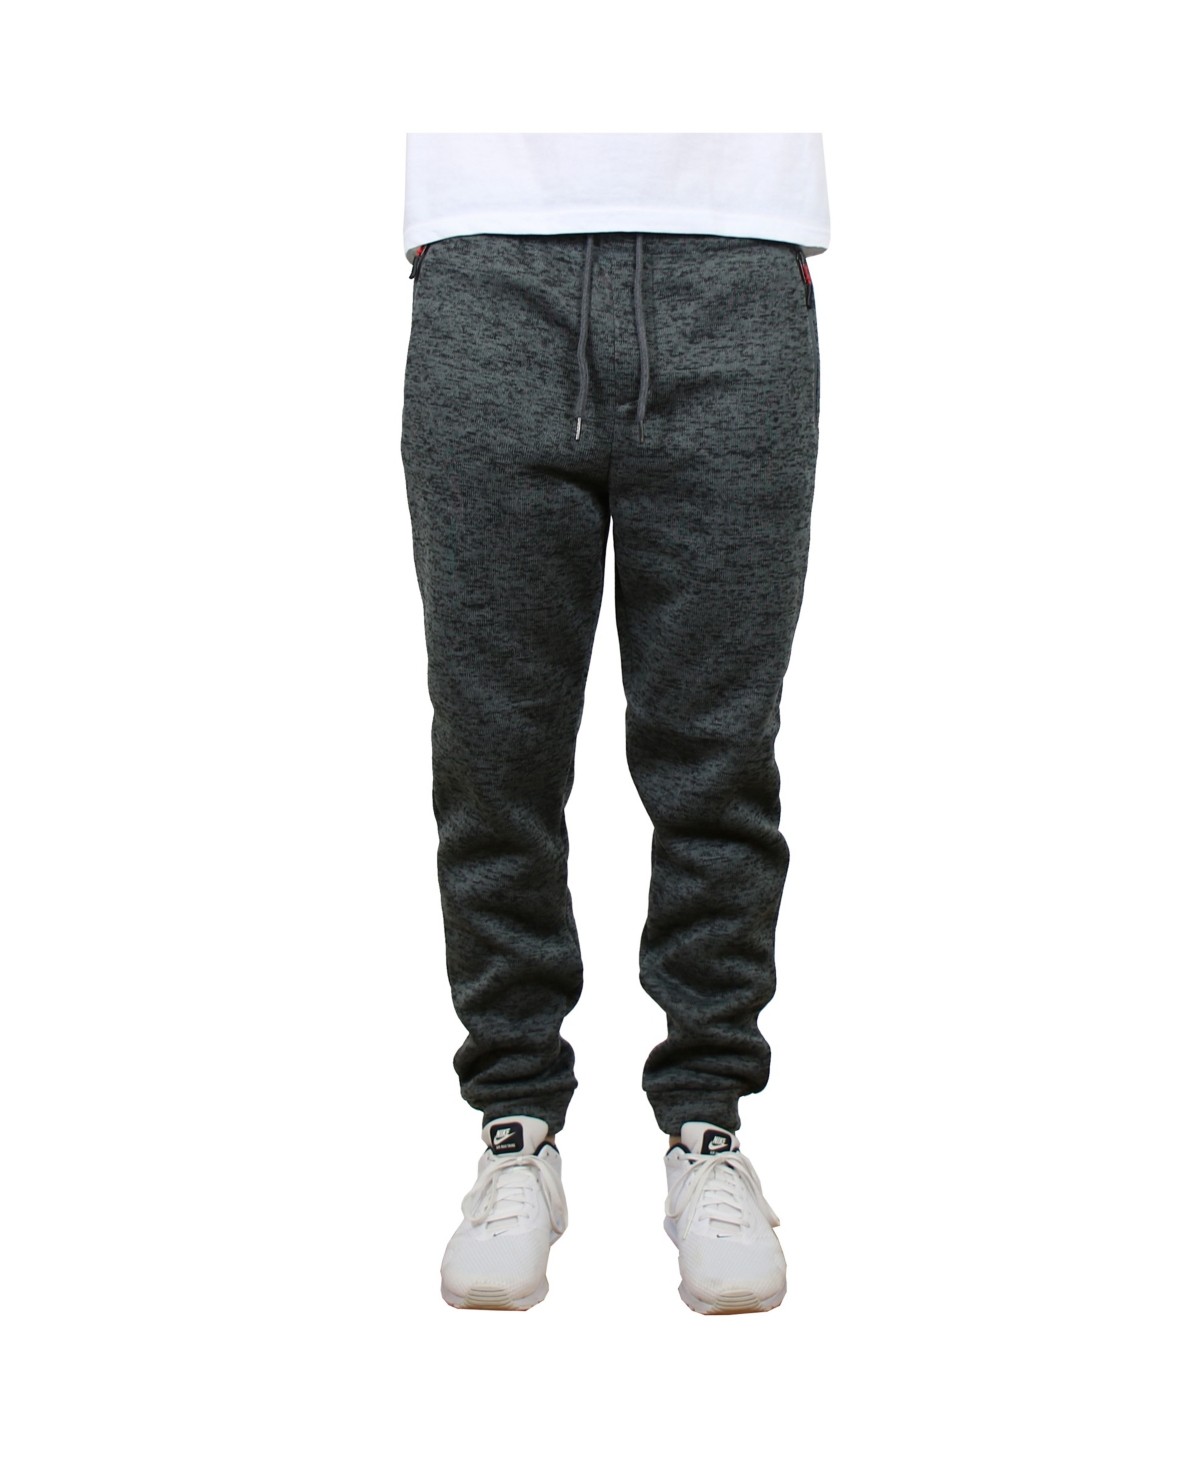 Men's Slim-Fit Marled Fleece Joggers with Zipper Side Pockets - Charcoal